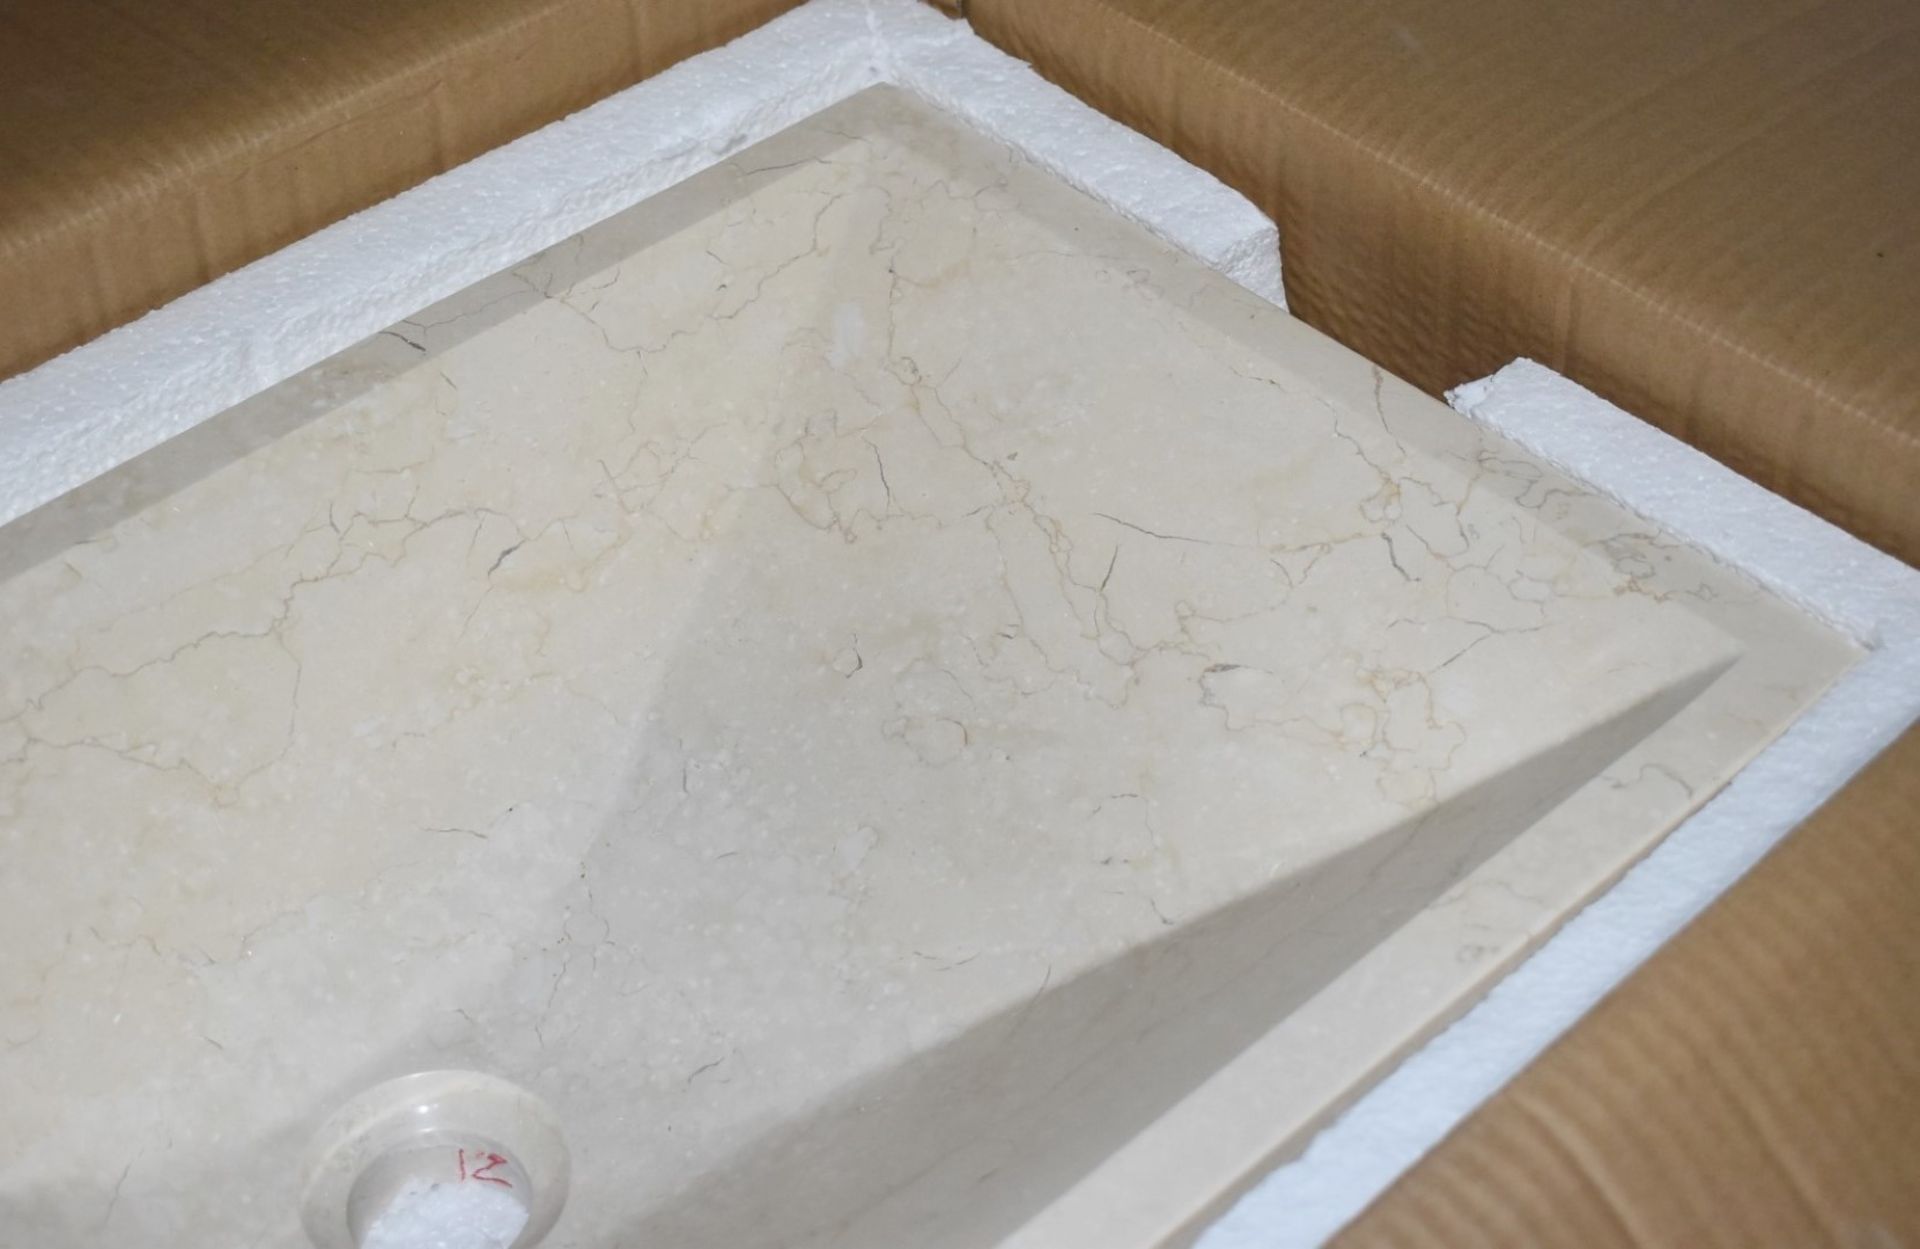 1 x Stonearth 'Karo' Solid Galala Marble Stone Countertop Sink Basin - New Boxed Stock - Image 4 of 8